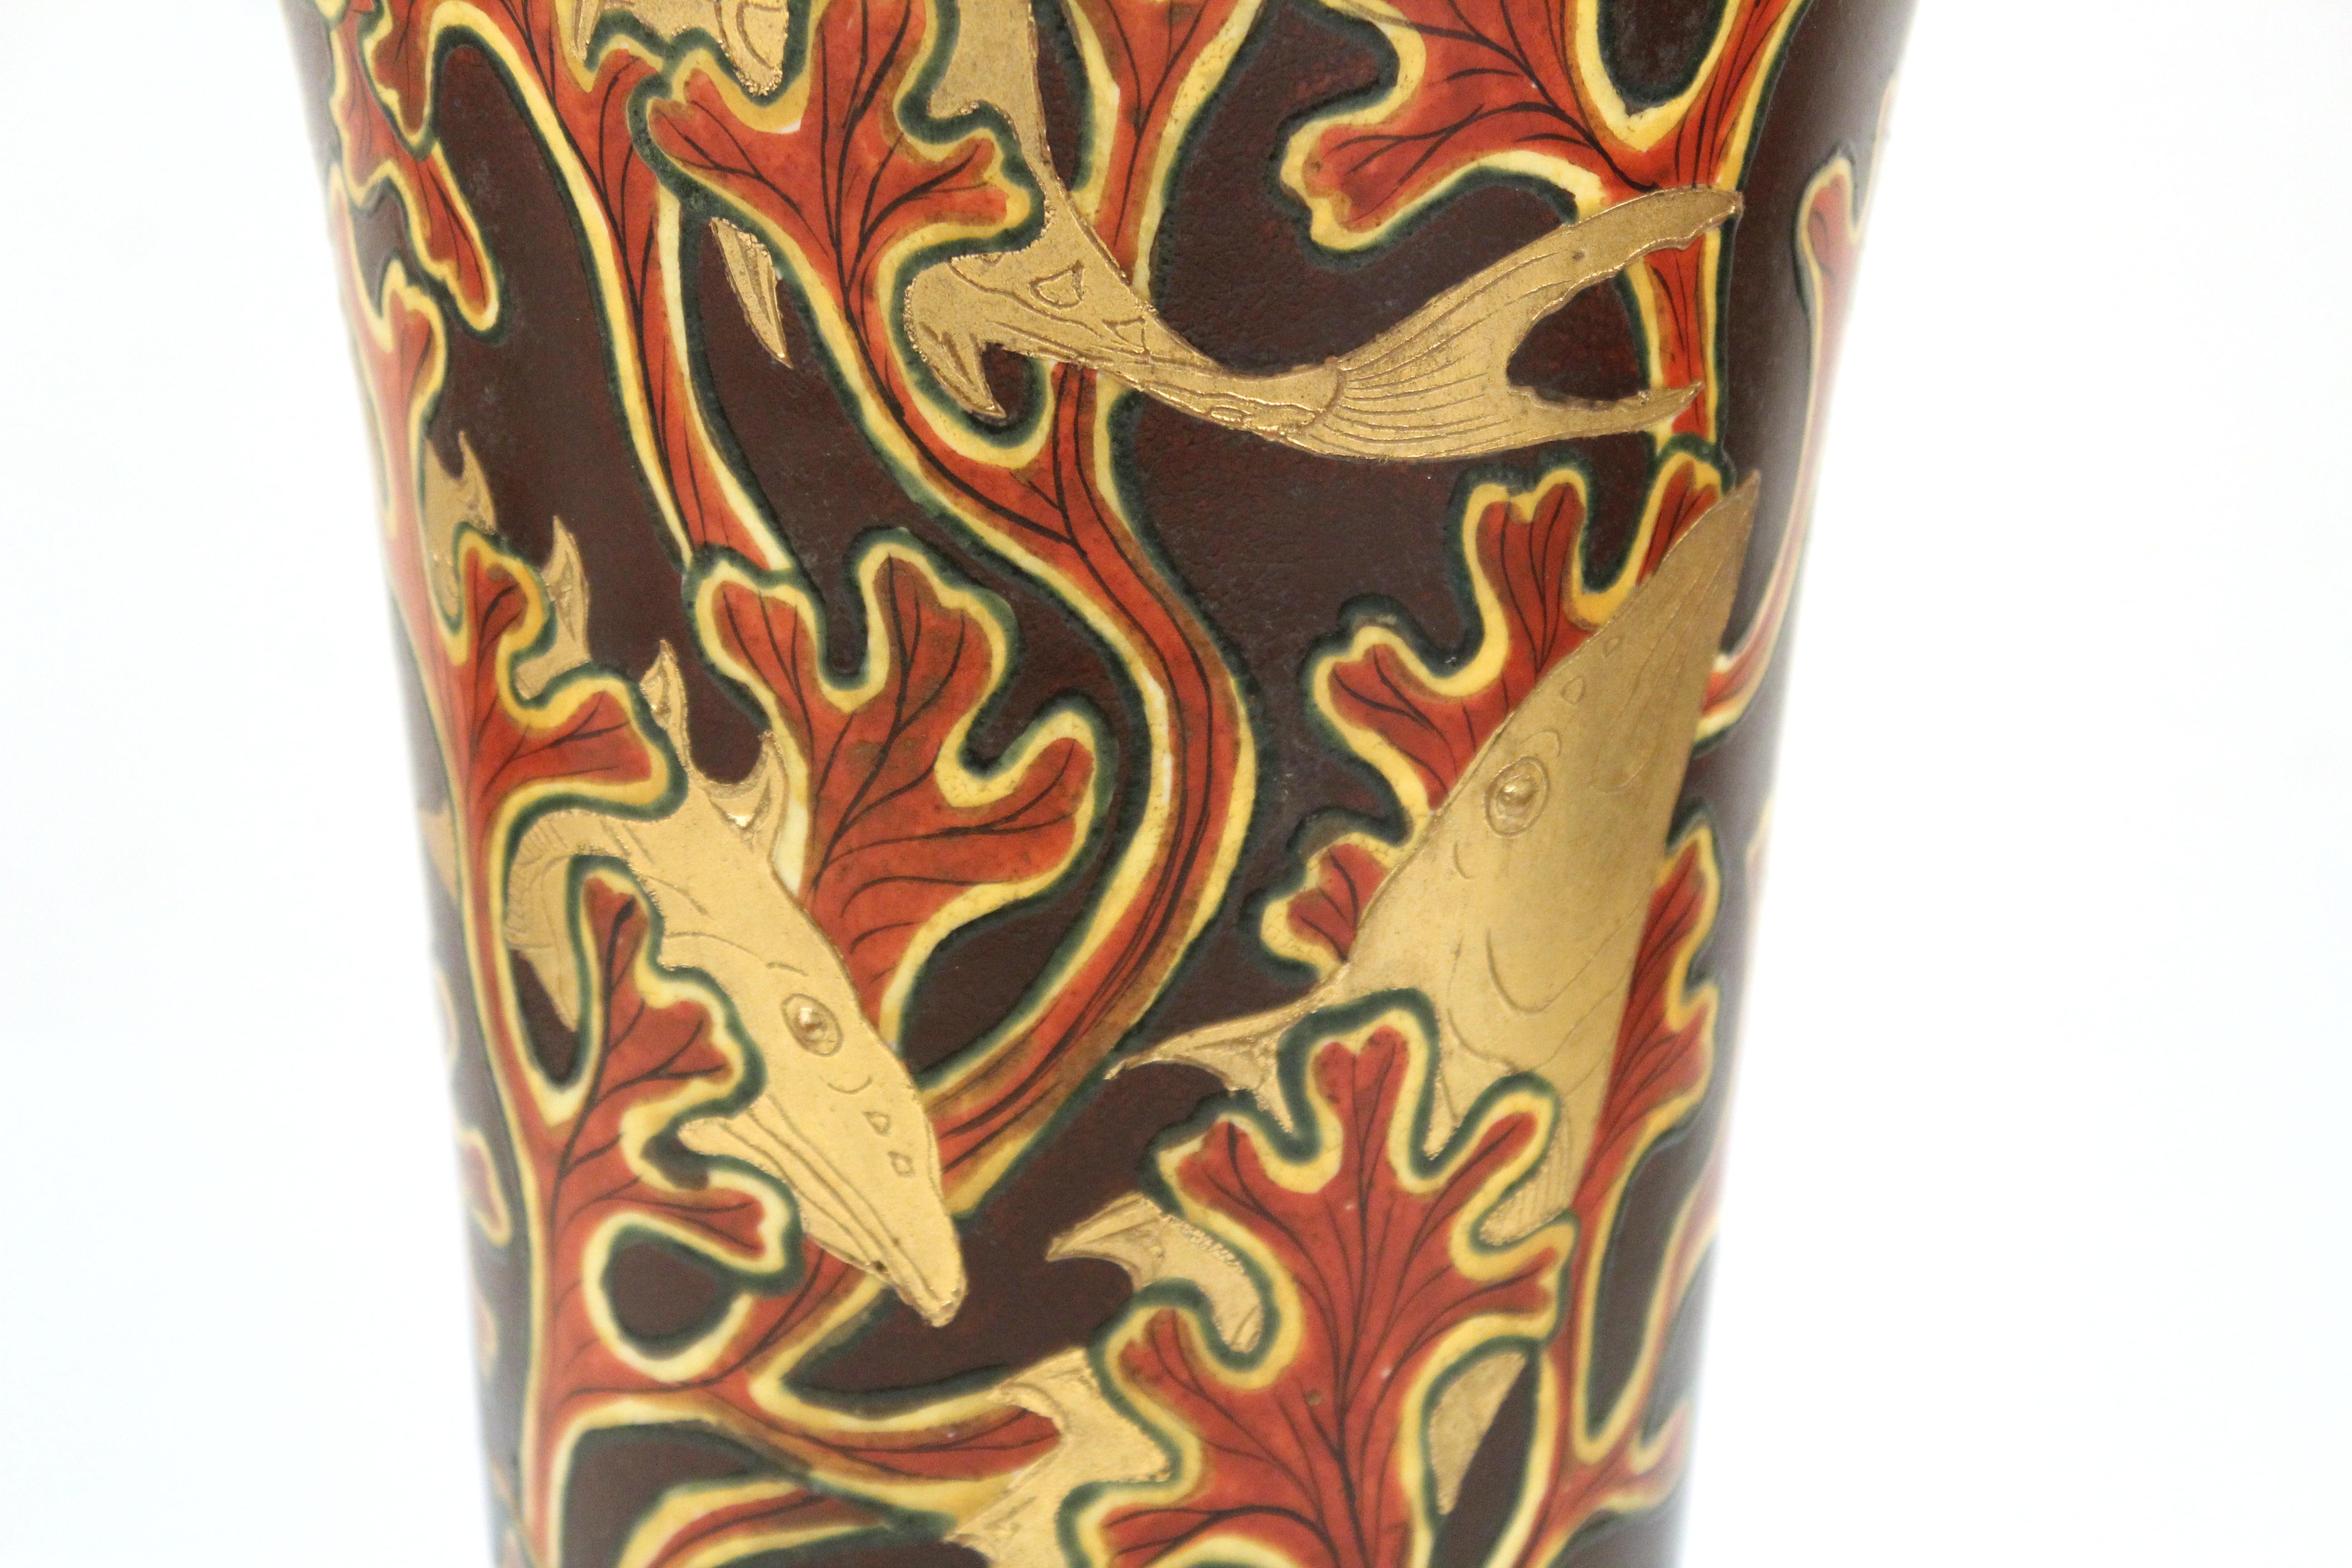 Japanese Meiji Satsuma Vase in Lacquered Porcelain with Golden Fish Motif In Good Condition For Sale In New York, NY